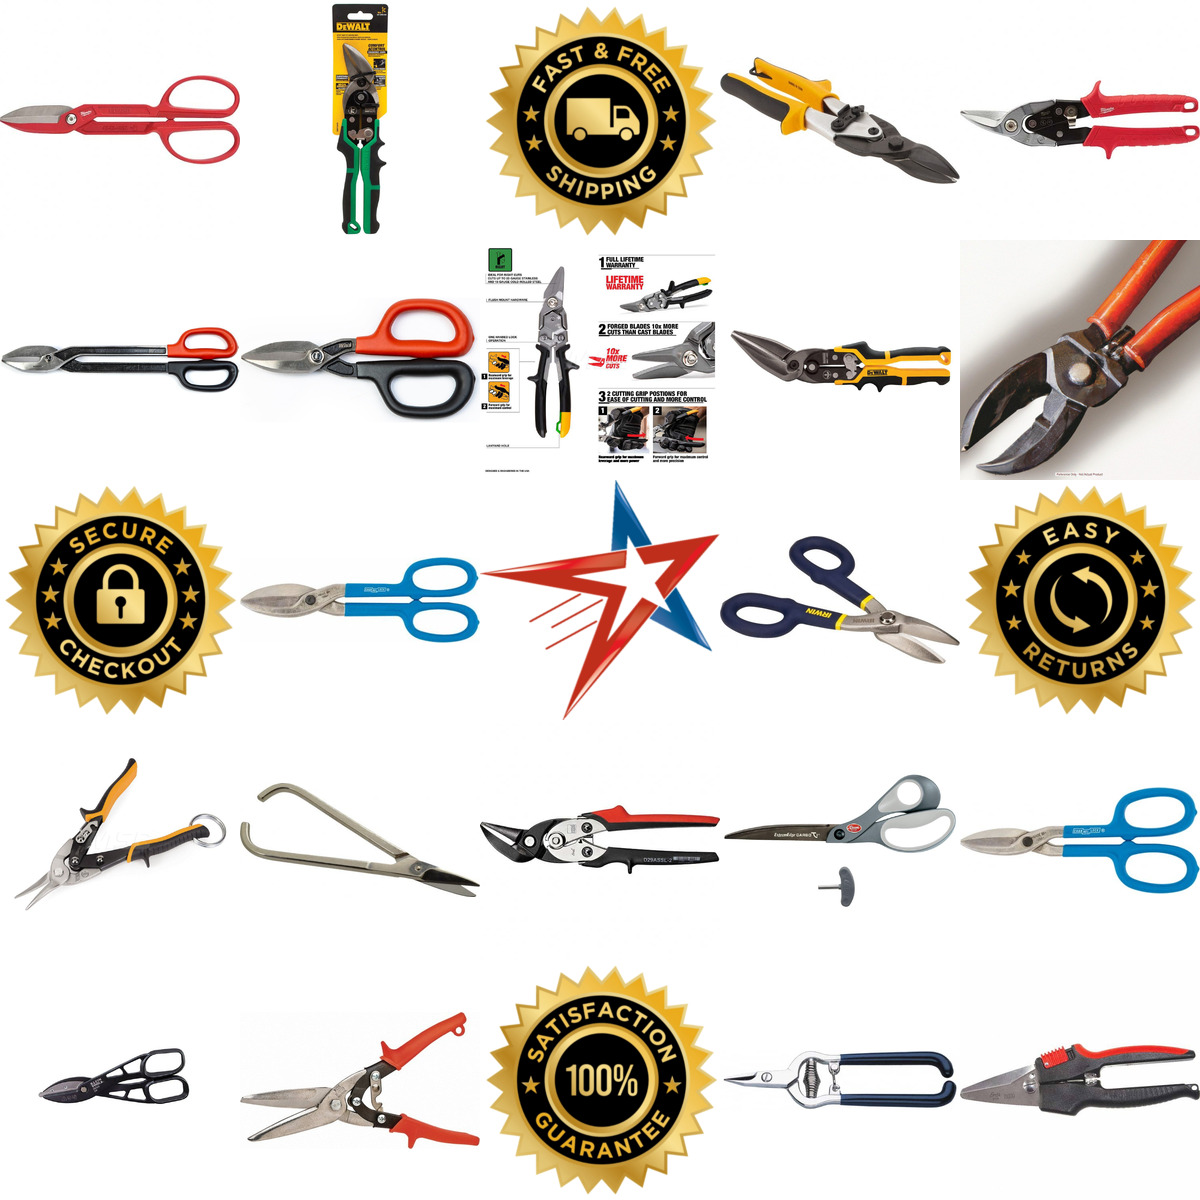 A selection of Snips products on GoVets